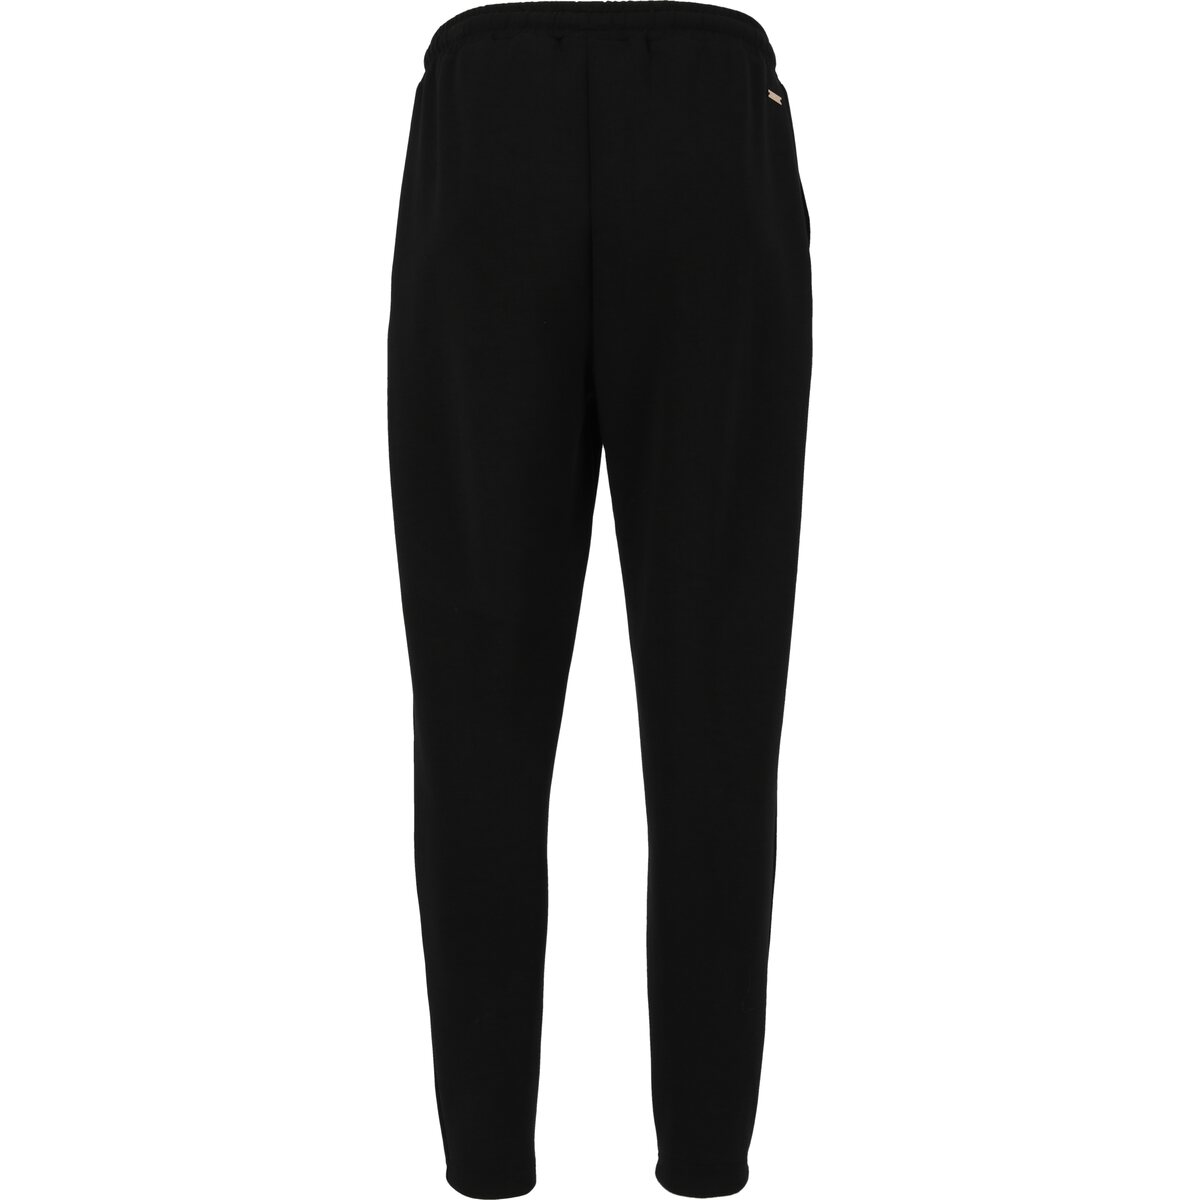 Athlecia Jacey V2 Womenswear Sweat Pants - Black 7 Shaws Department Stores